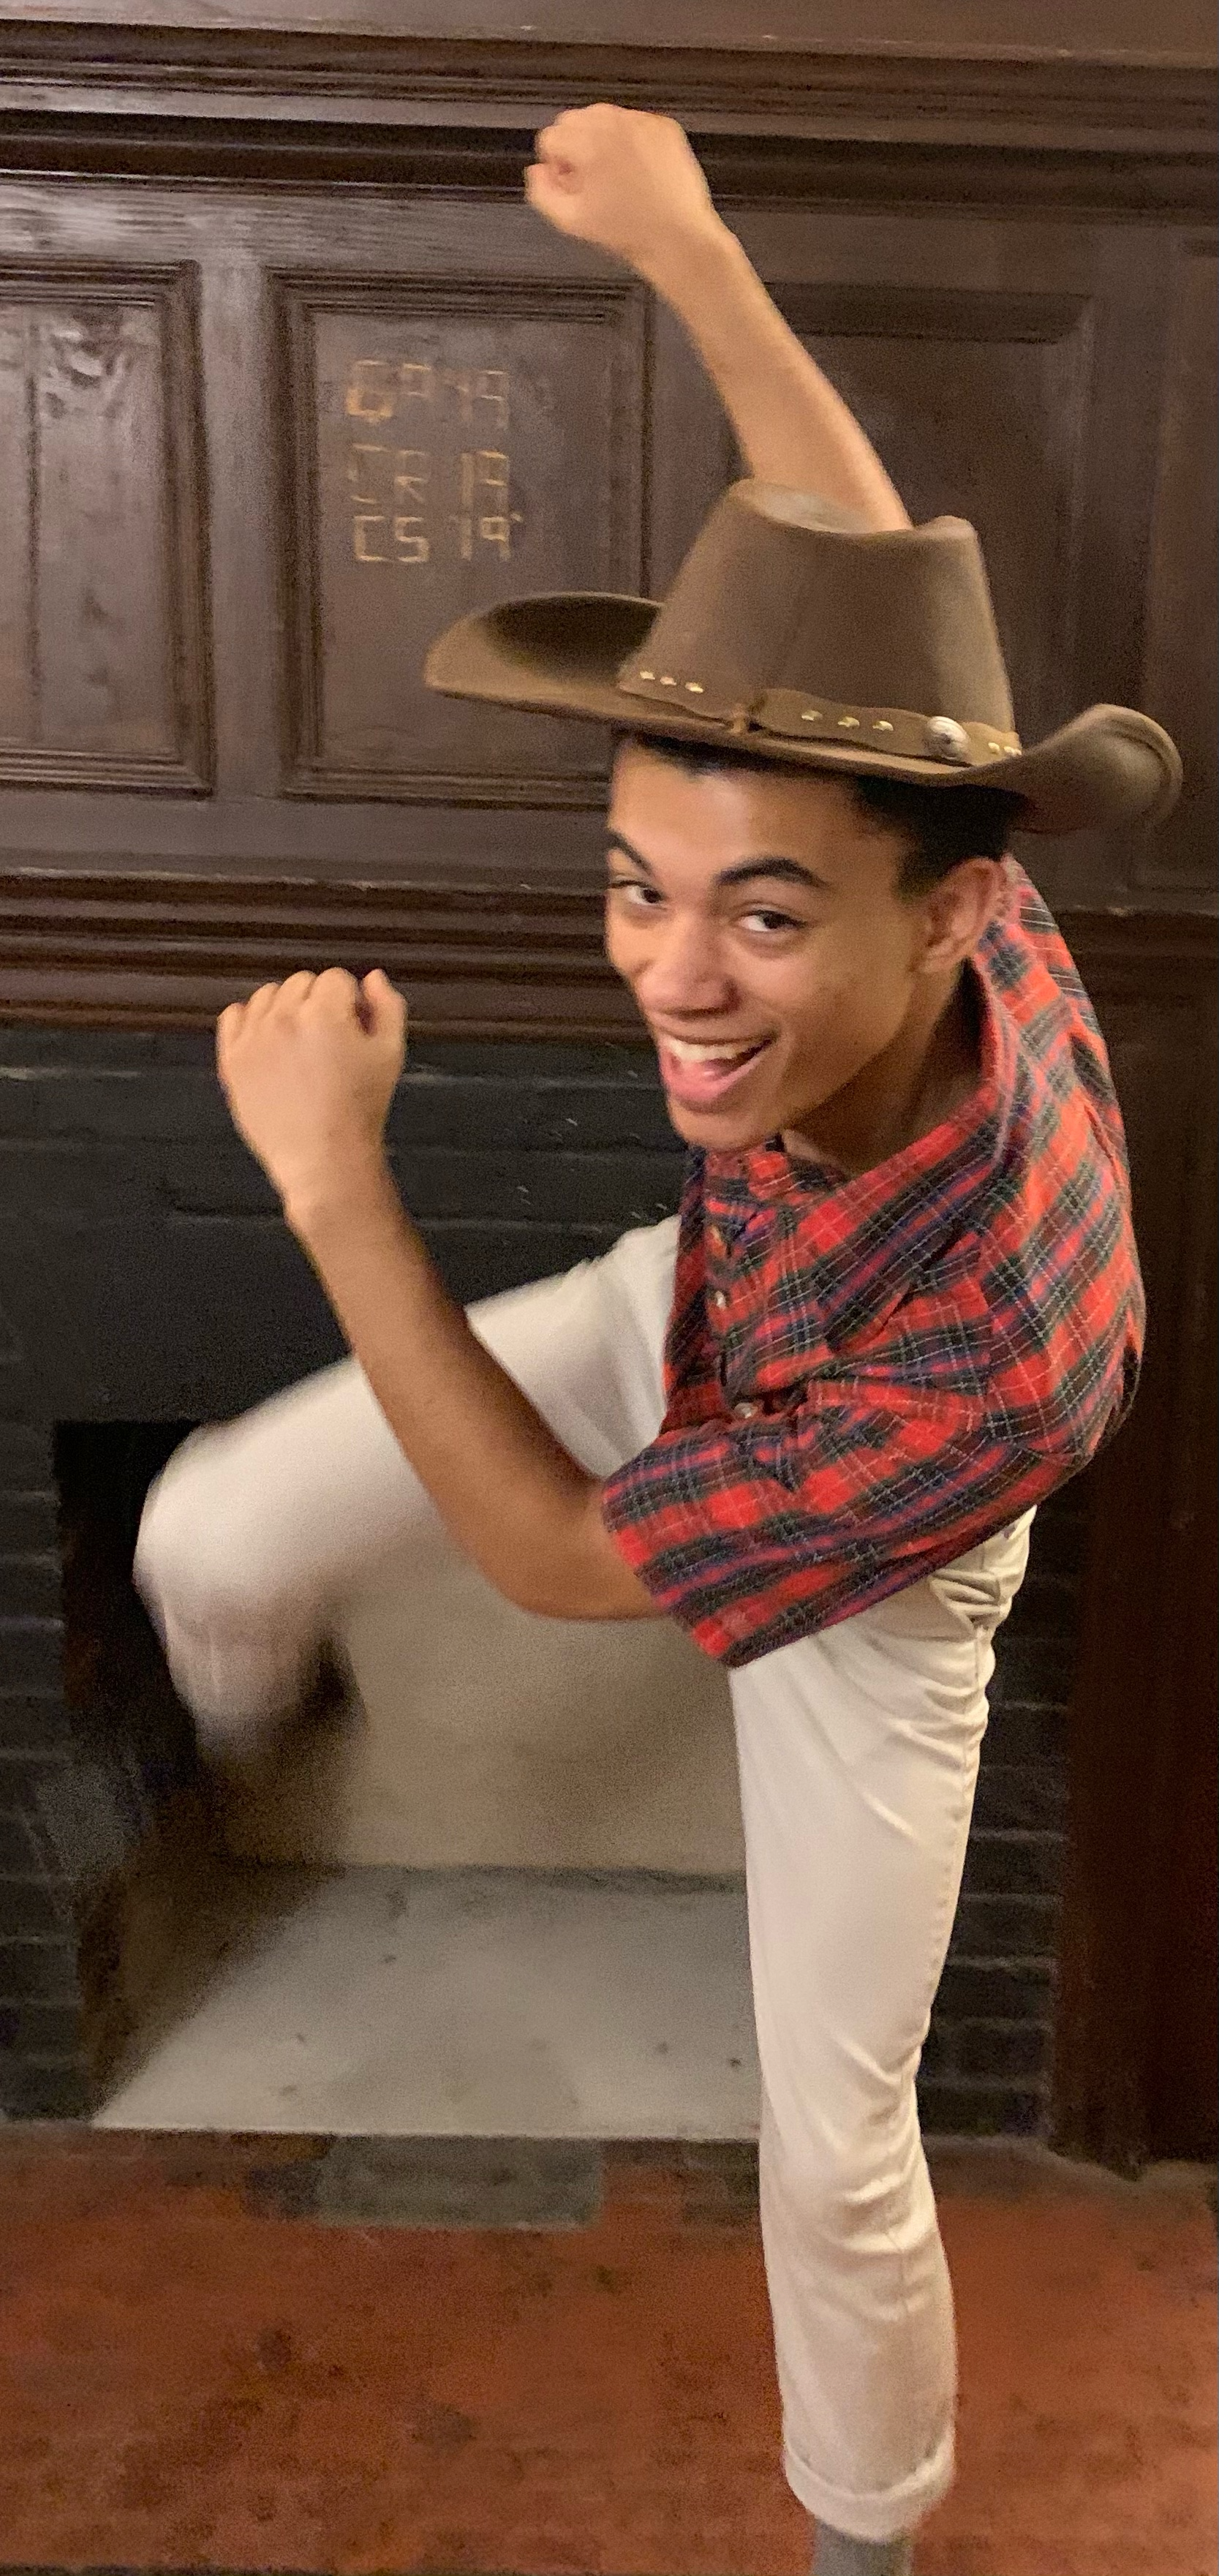 A cowboy jumping around in front of his fireplace.